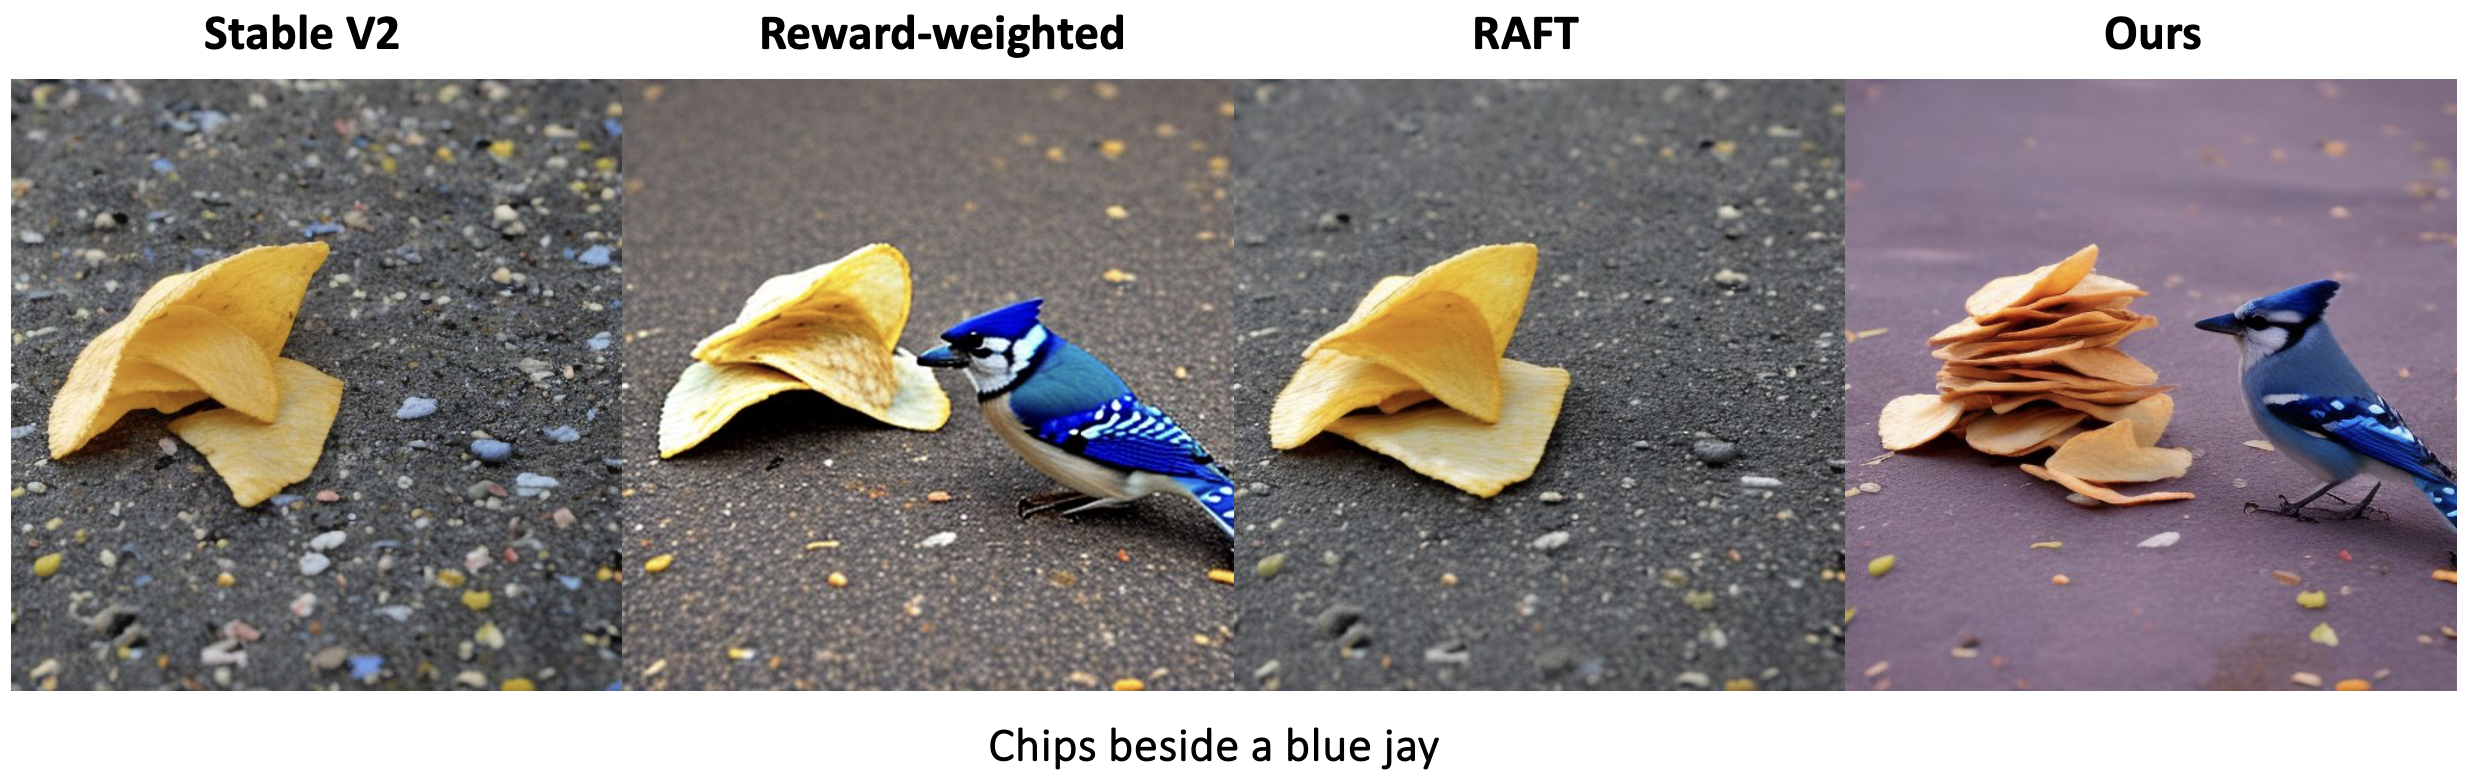 Chips beside a blue jay.